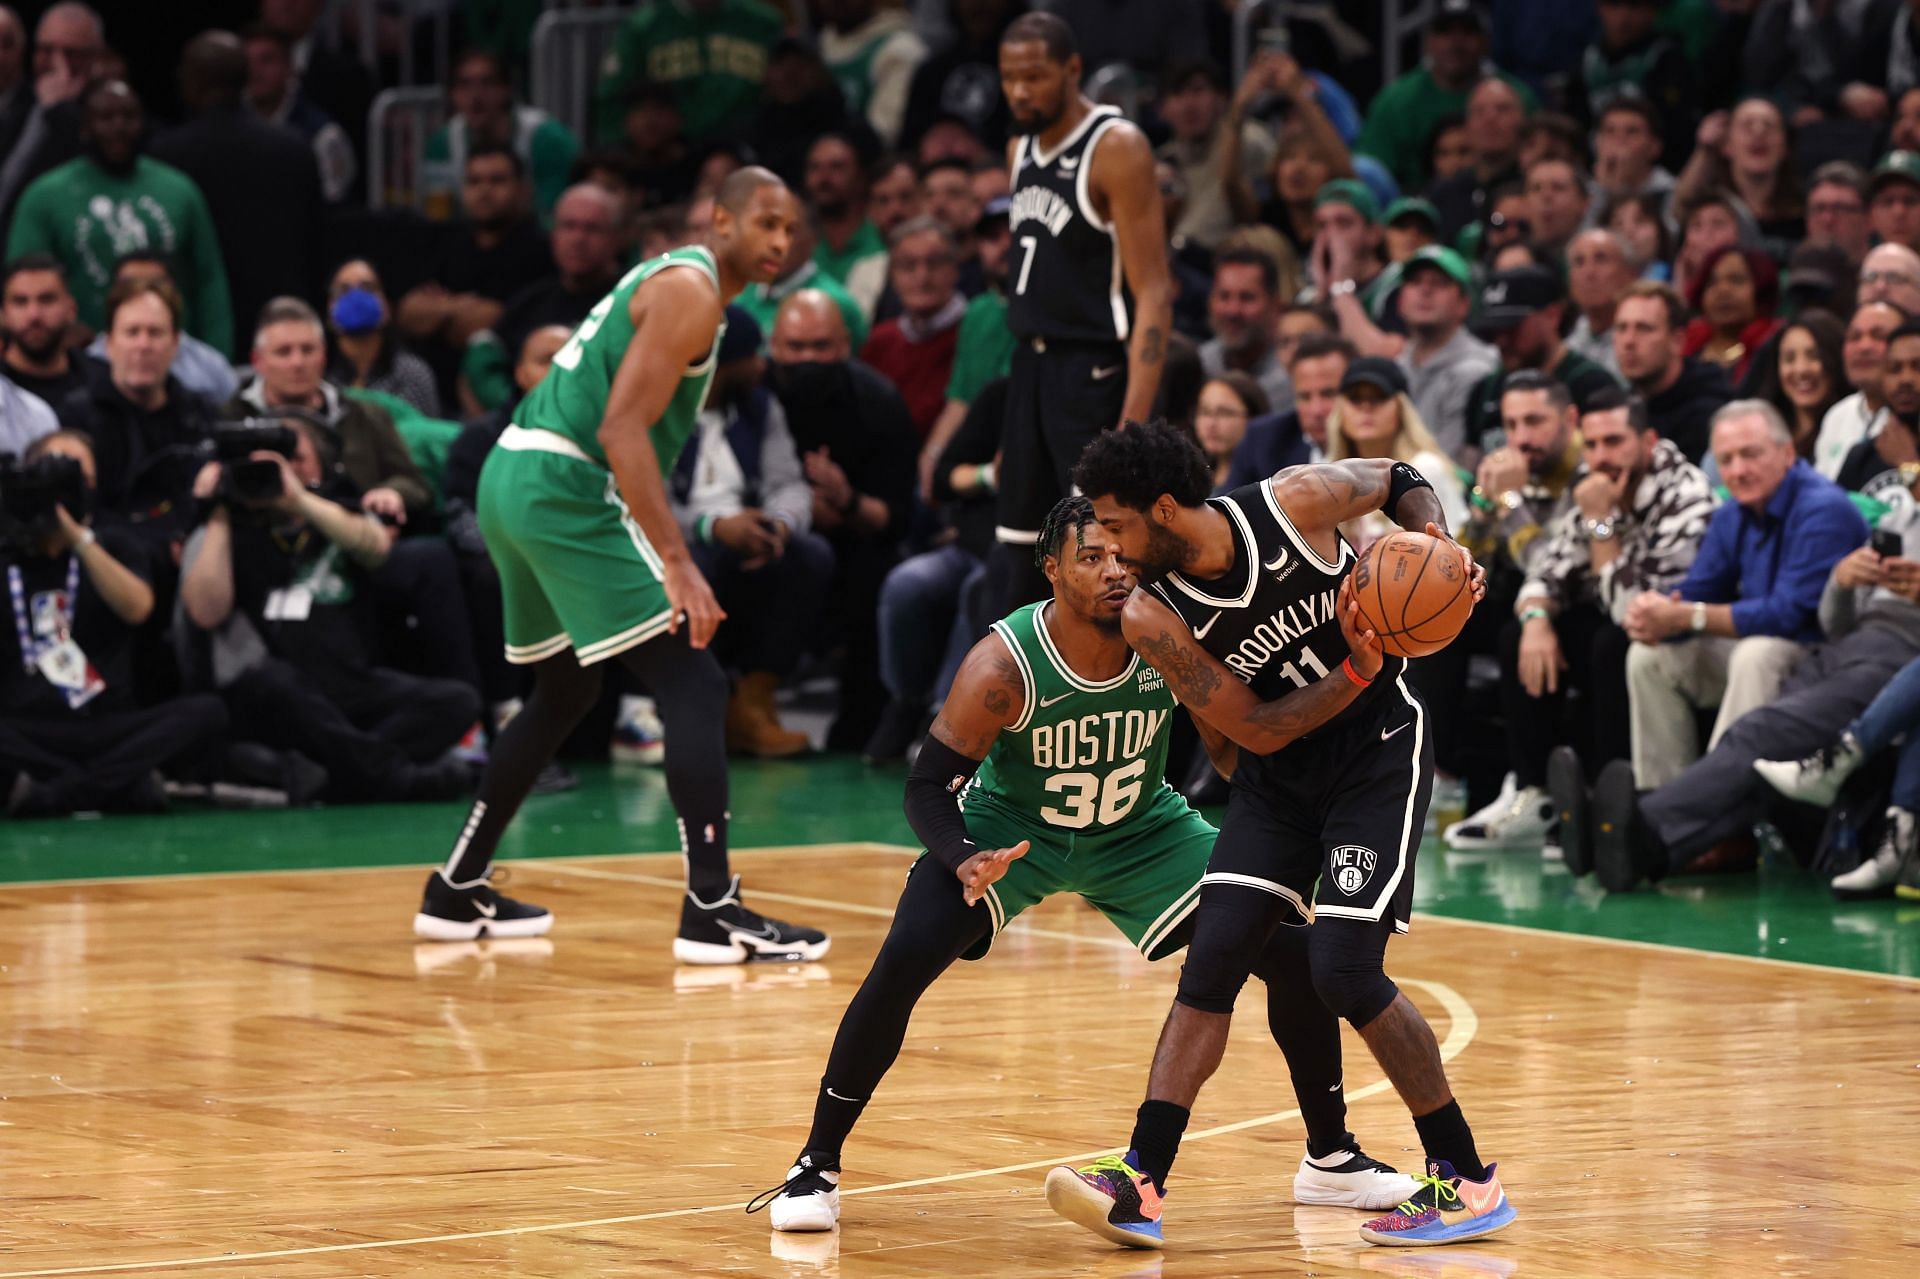 Kyrie Irving being guarded by Marcus Smart